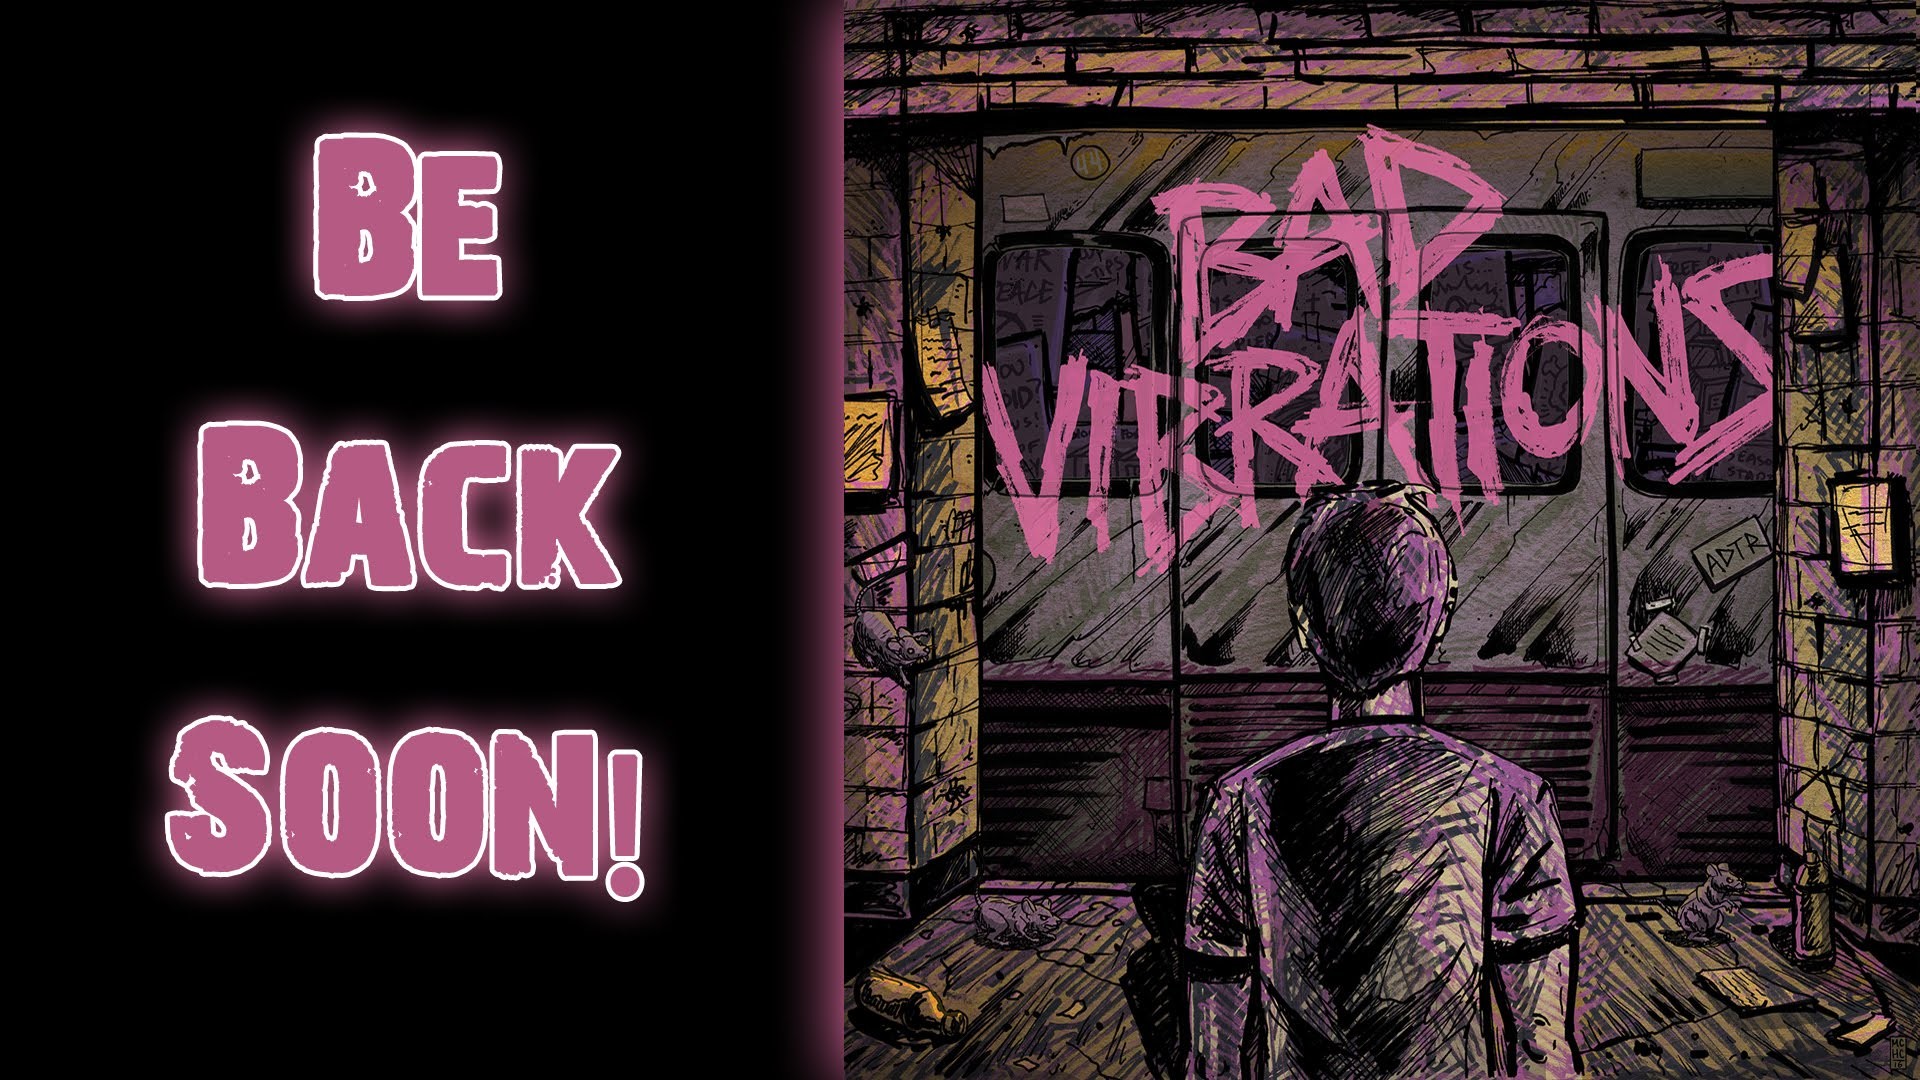 1920x1080 A Day To Remember - Bad Vibrations!